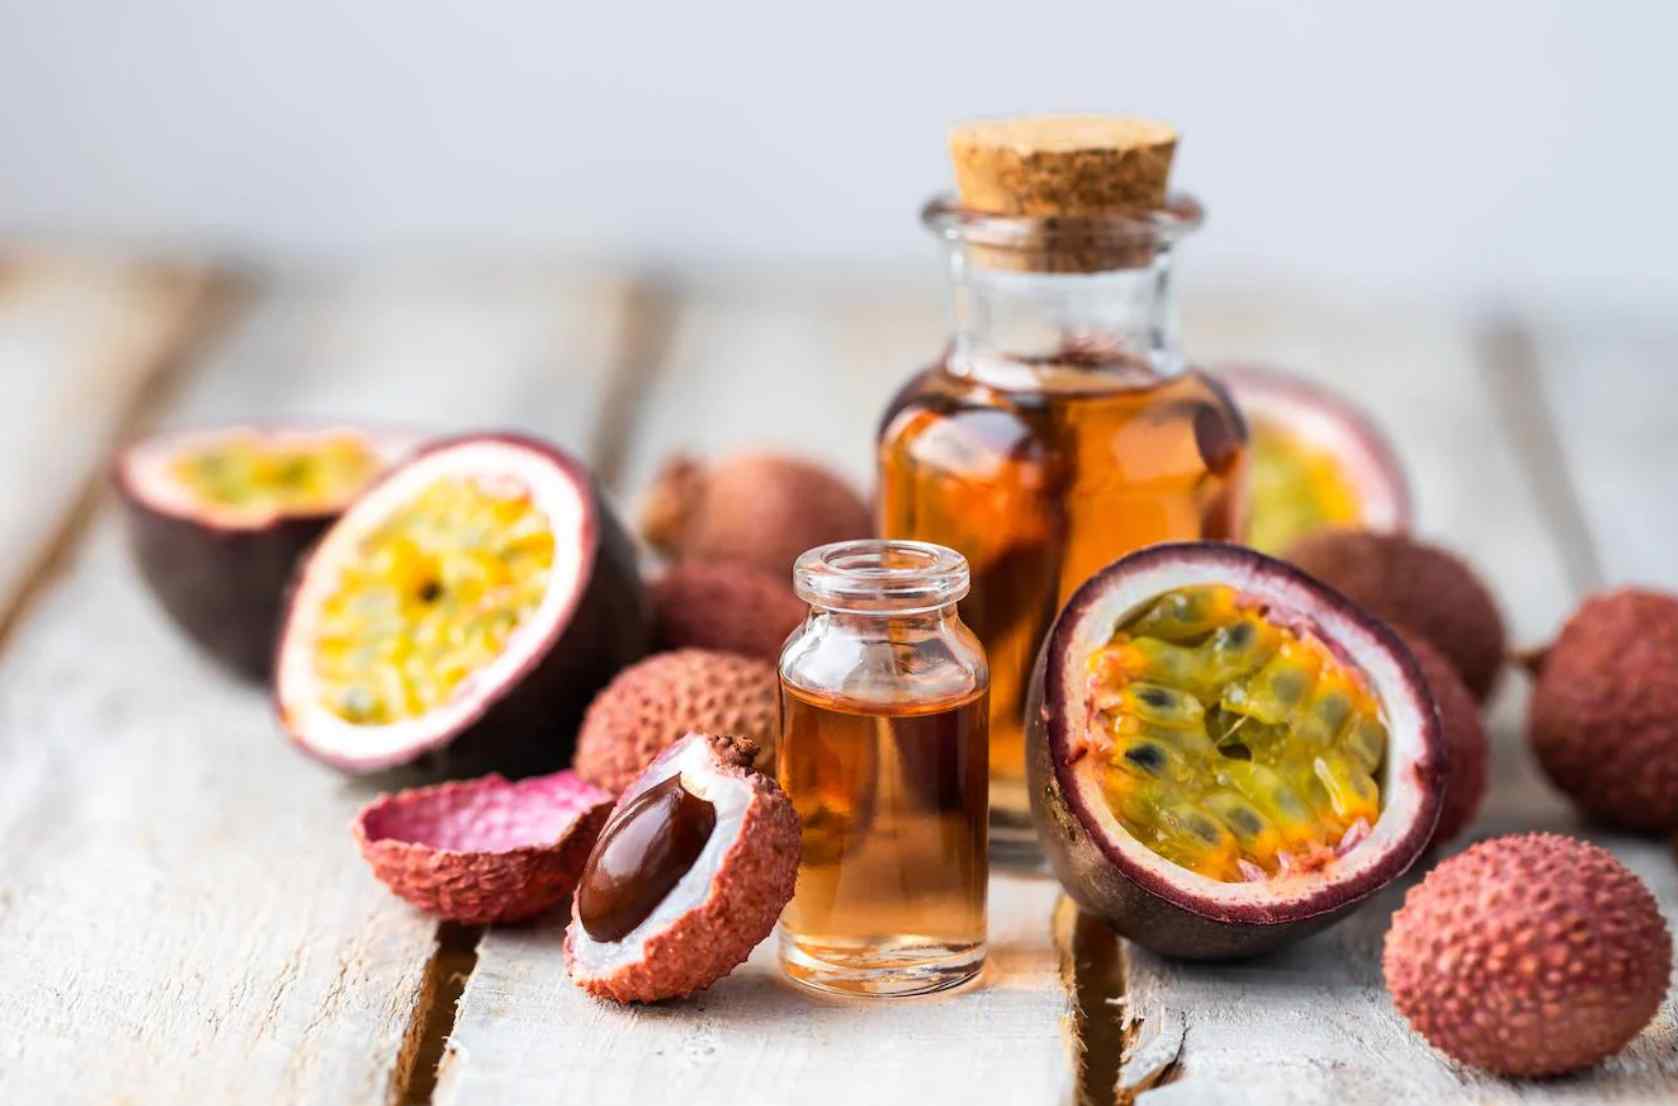 Organic pure passion fruit oil offers loads of benefits.